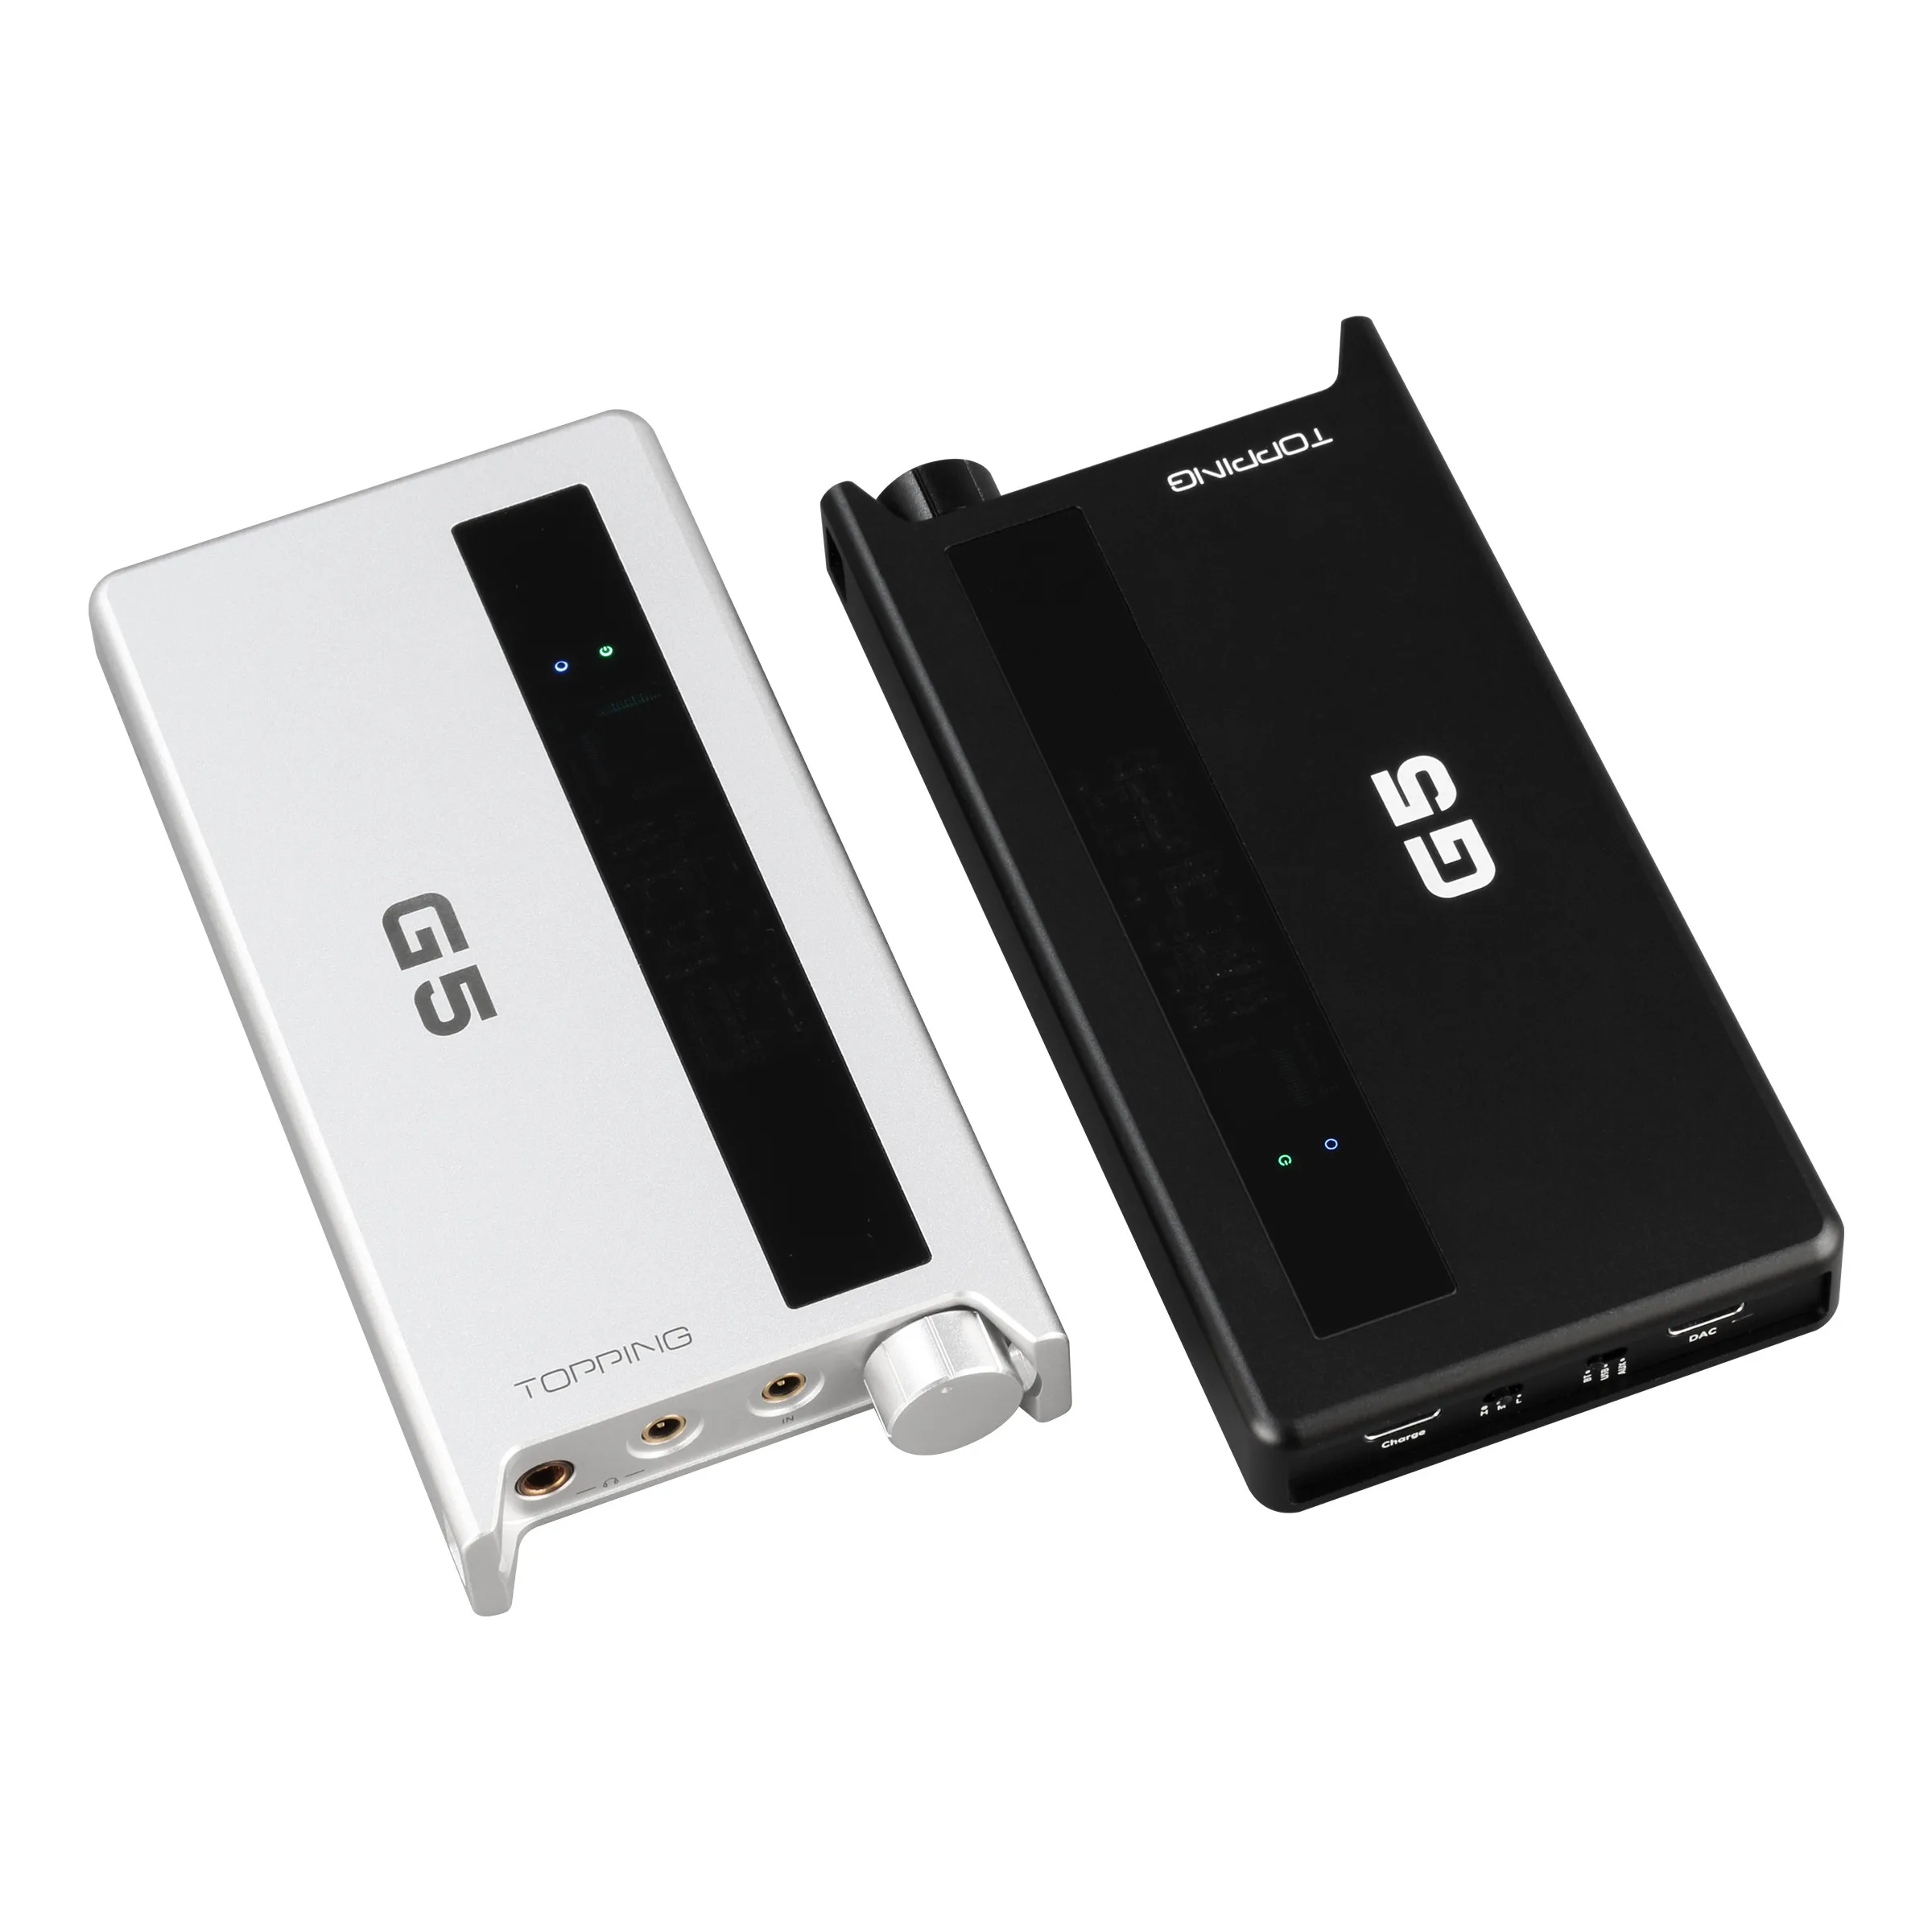 

TOPPING G5 Headphone Amplifier Portable ES9068AS DAC&Amp LDAC Hi-res Audio Support UP To DSD512 768kHz